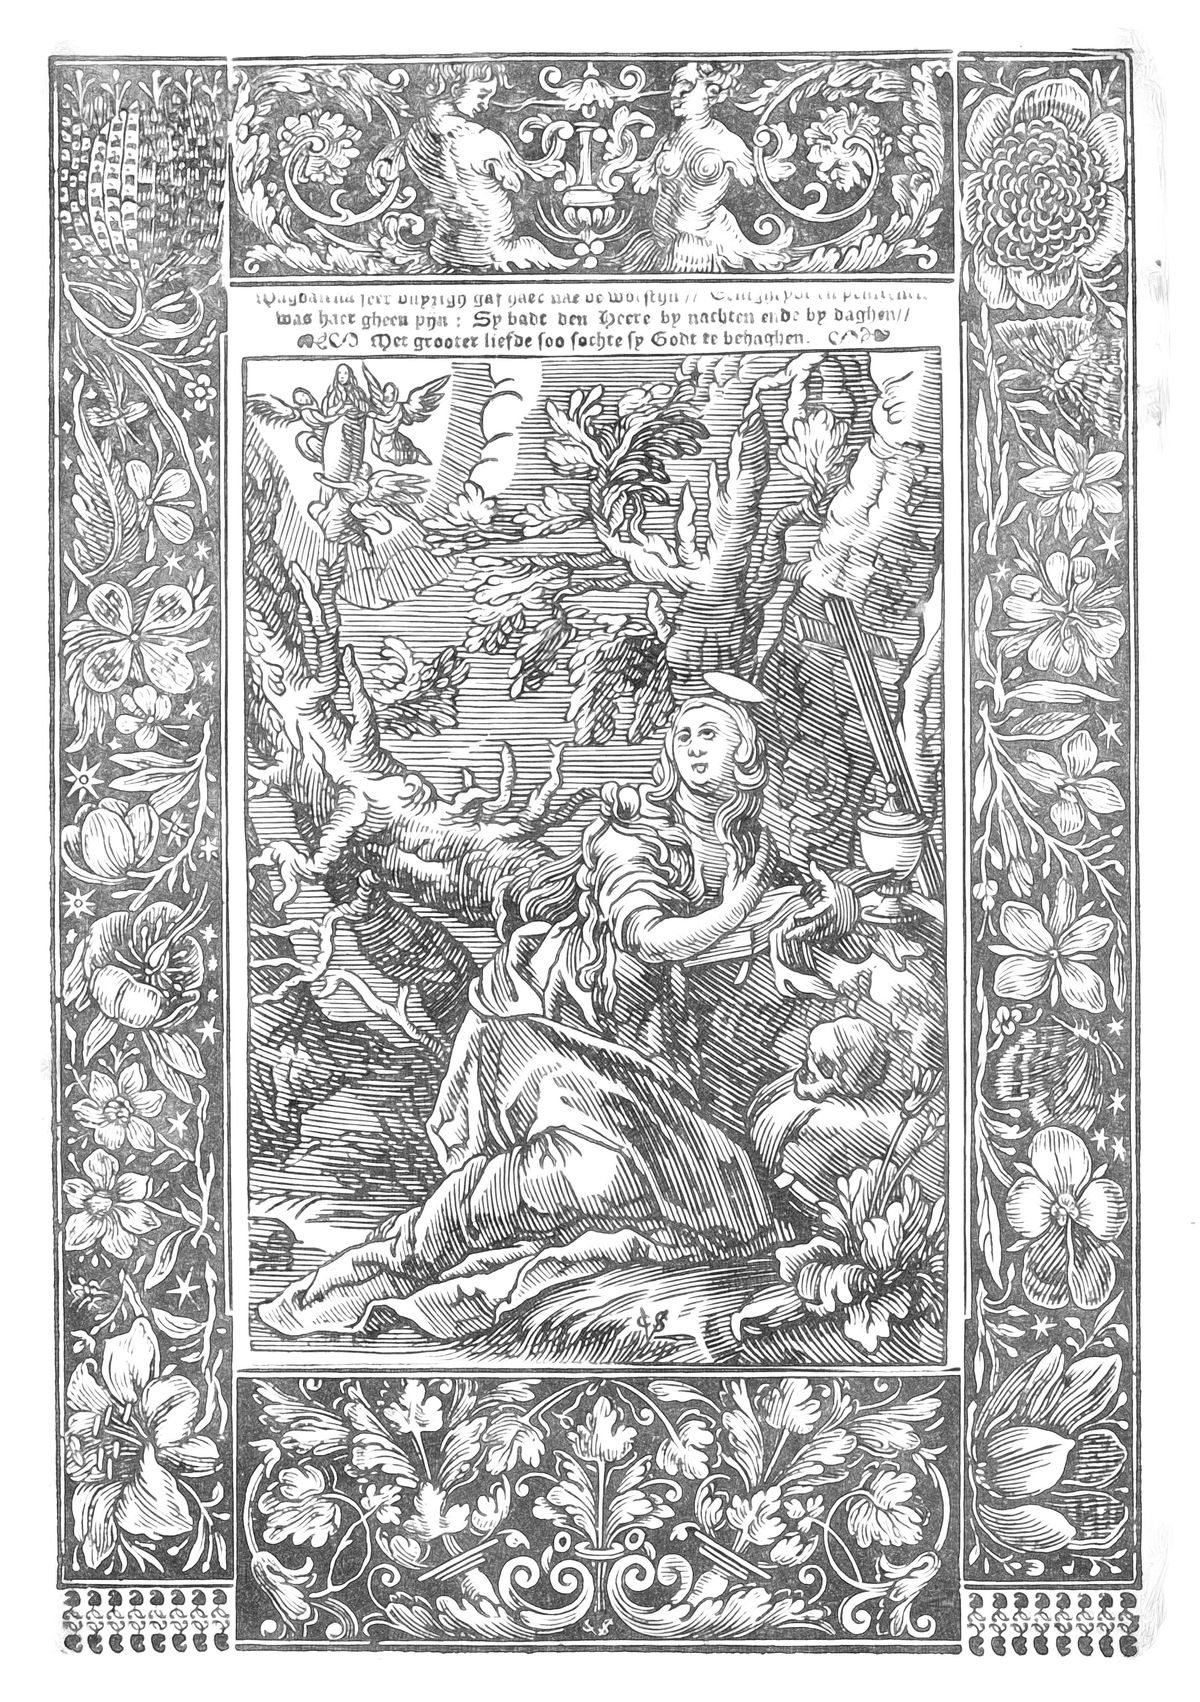 Penitent Saint Mary Magdalene (1589-1659) by Christoffel van Sichem - Catholic Coloring Page